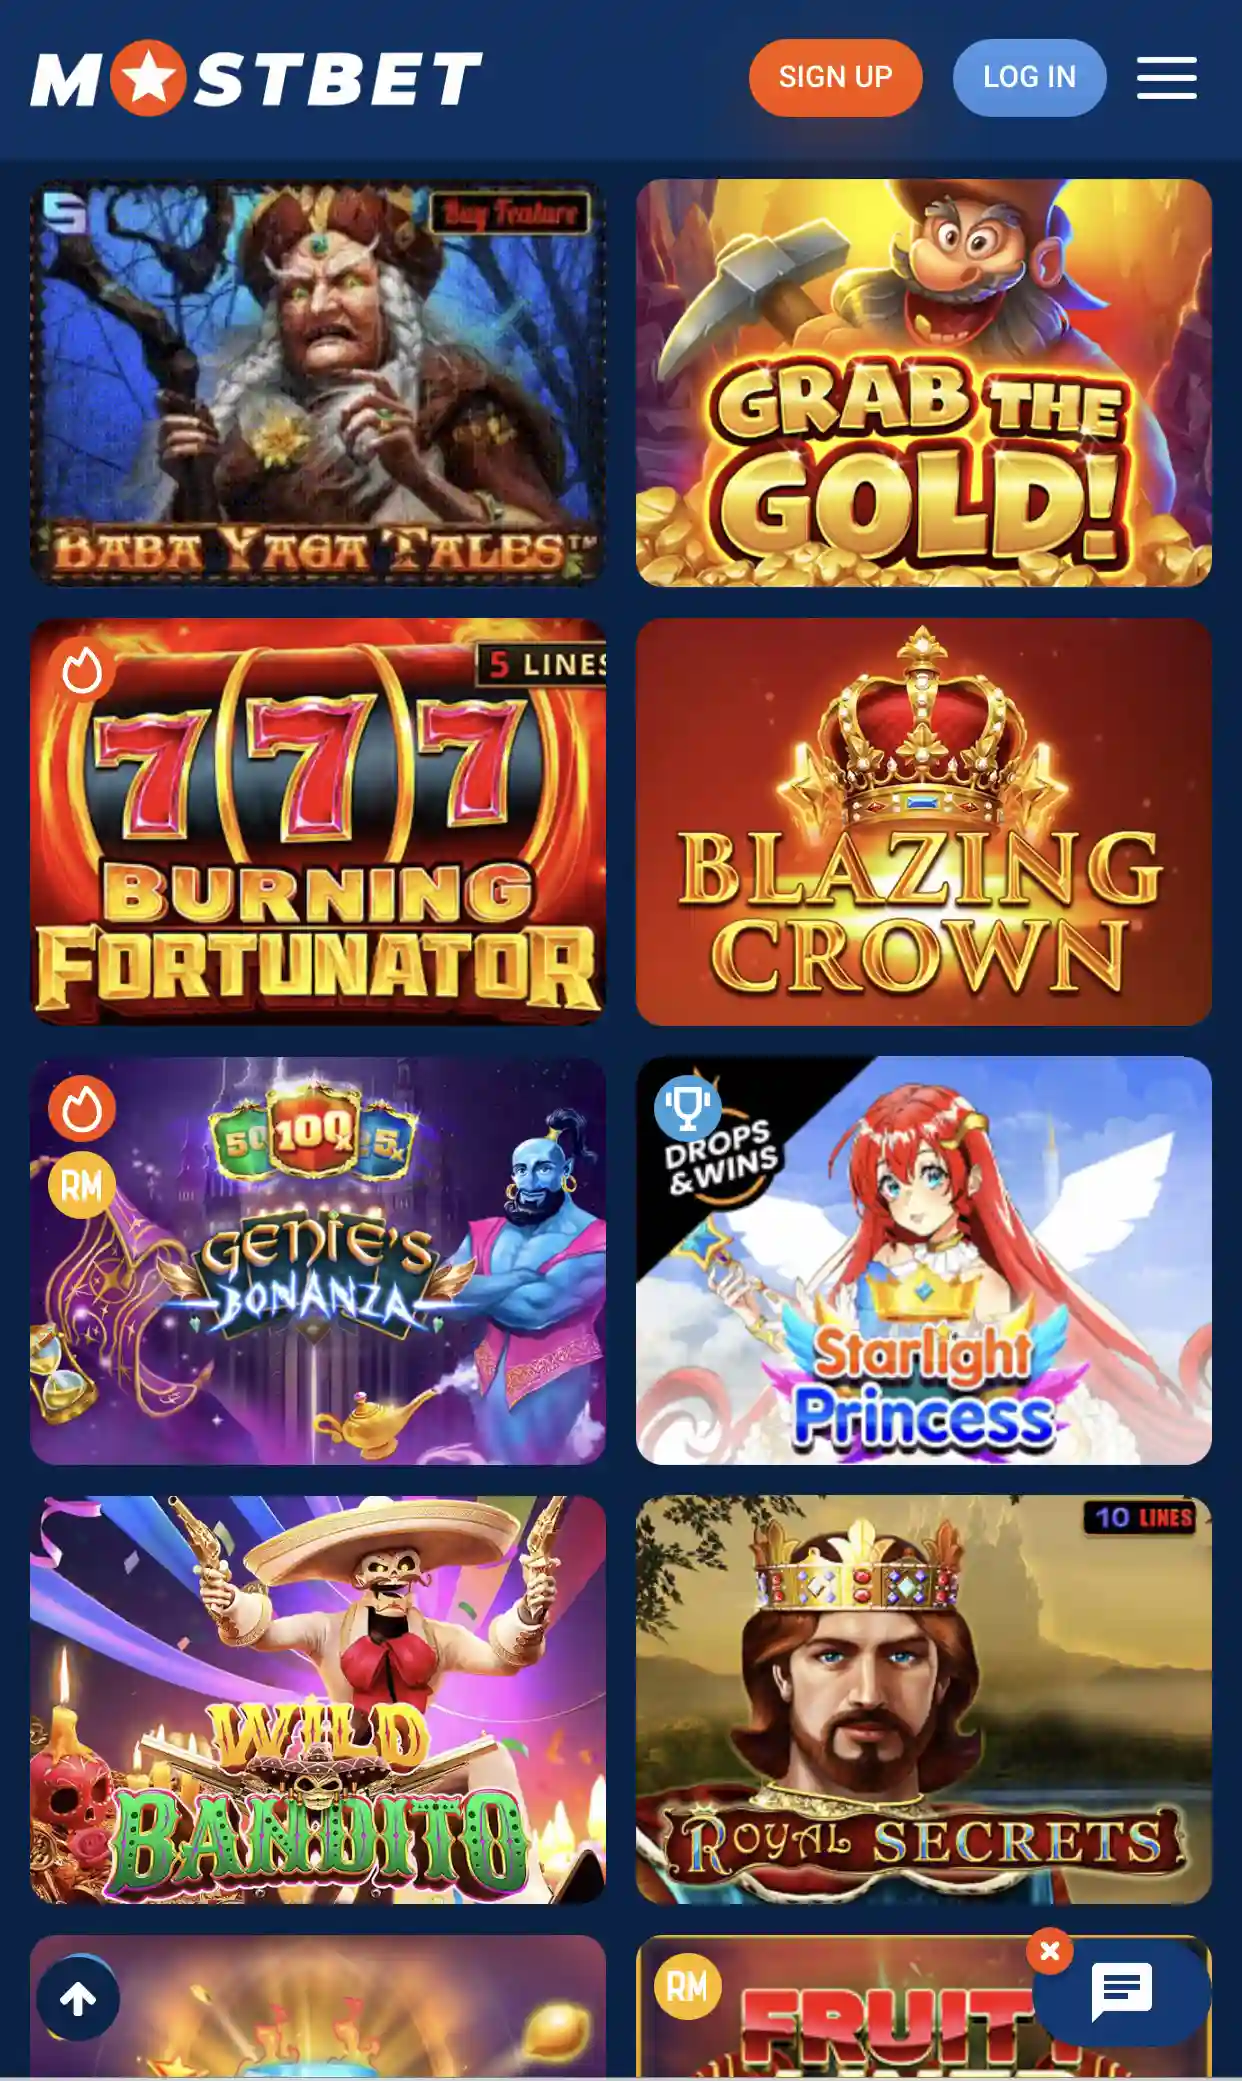 A wide range of games to suit all tastes for Mostbet players.